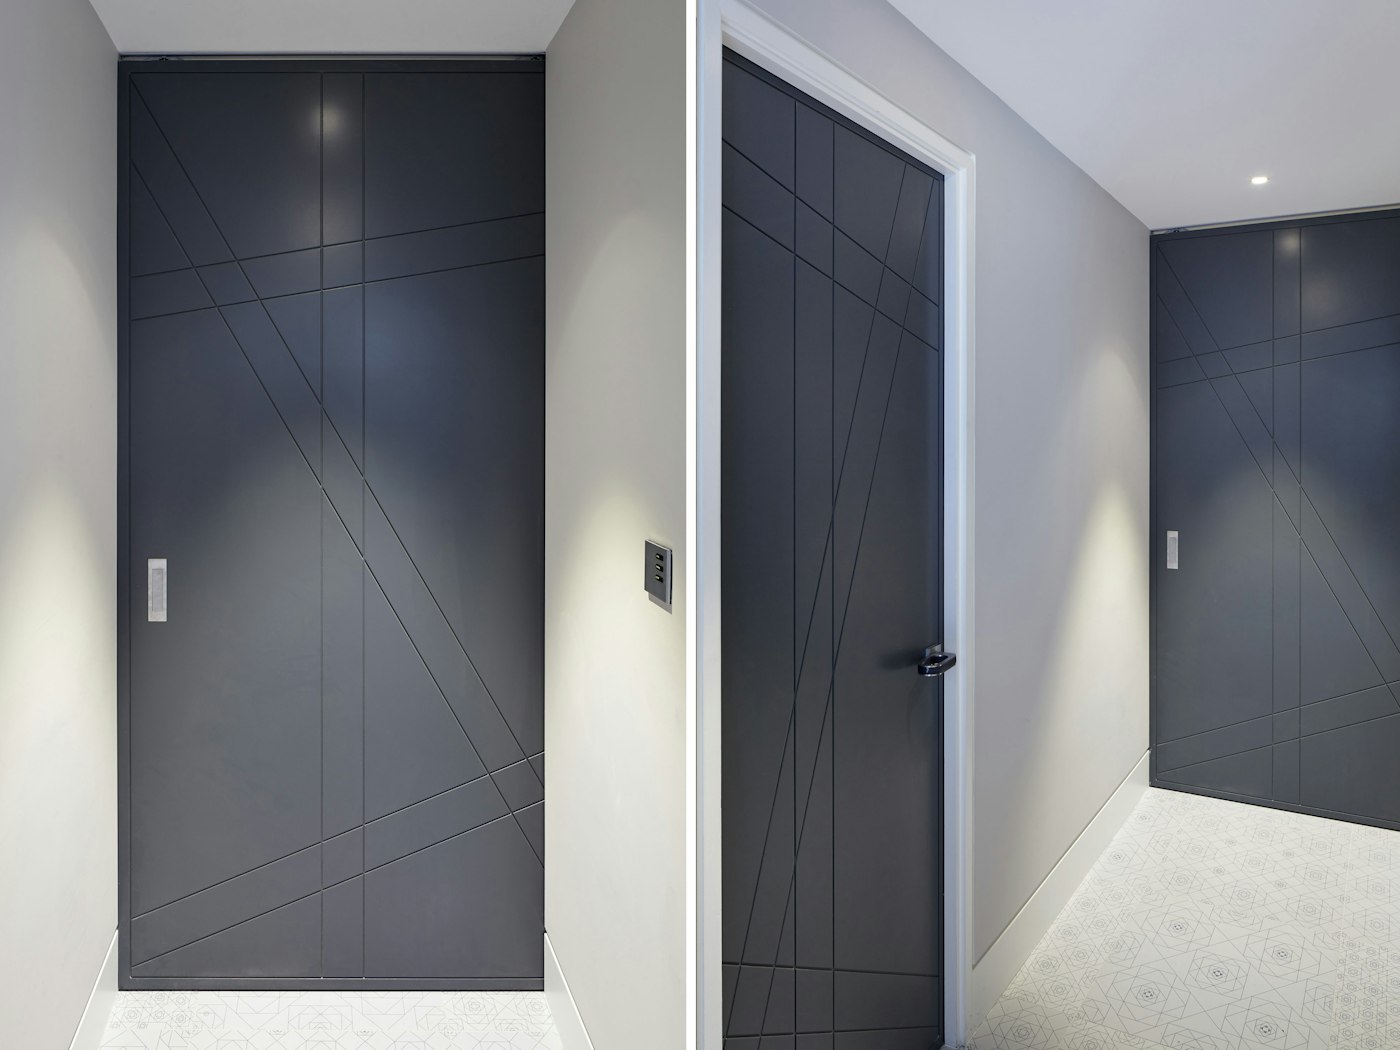 The geometric design on the "Root" internal doors works perfectly with the dark grey finish 